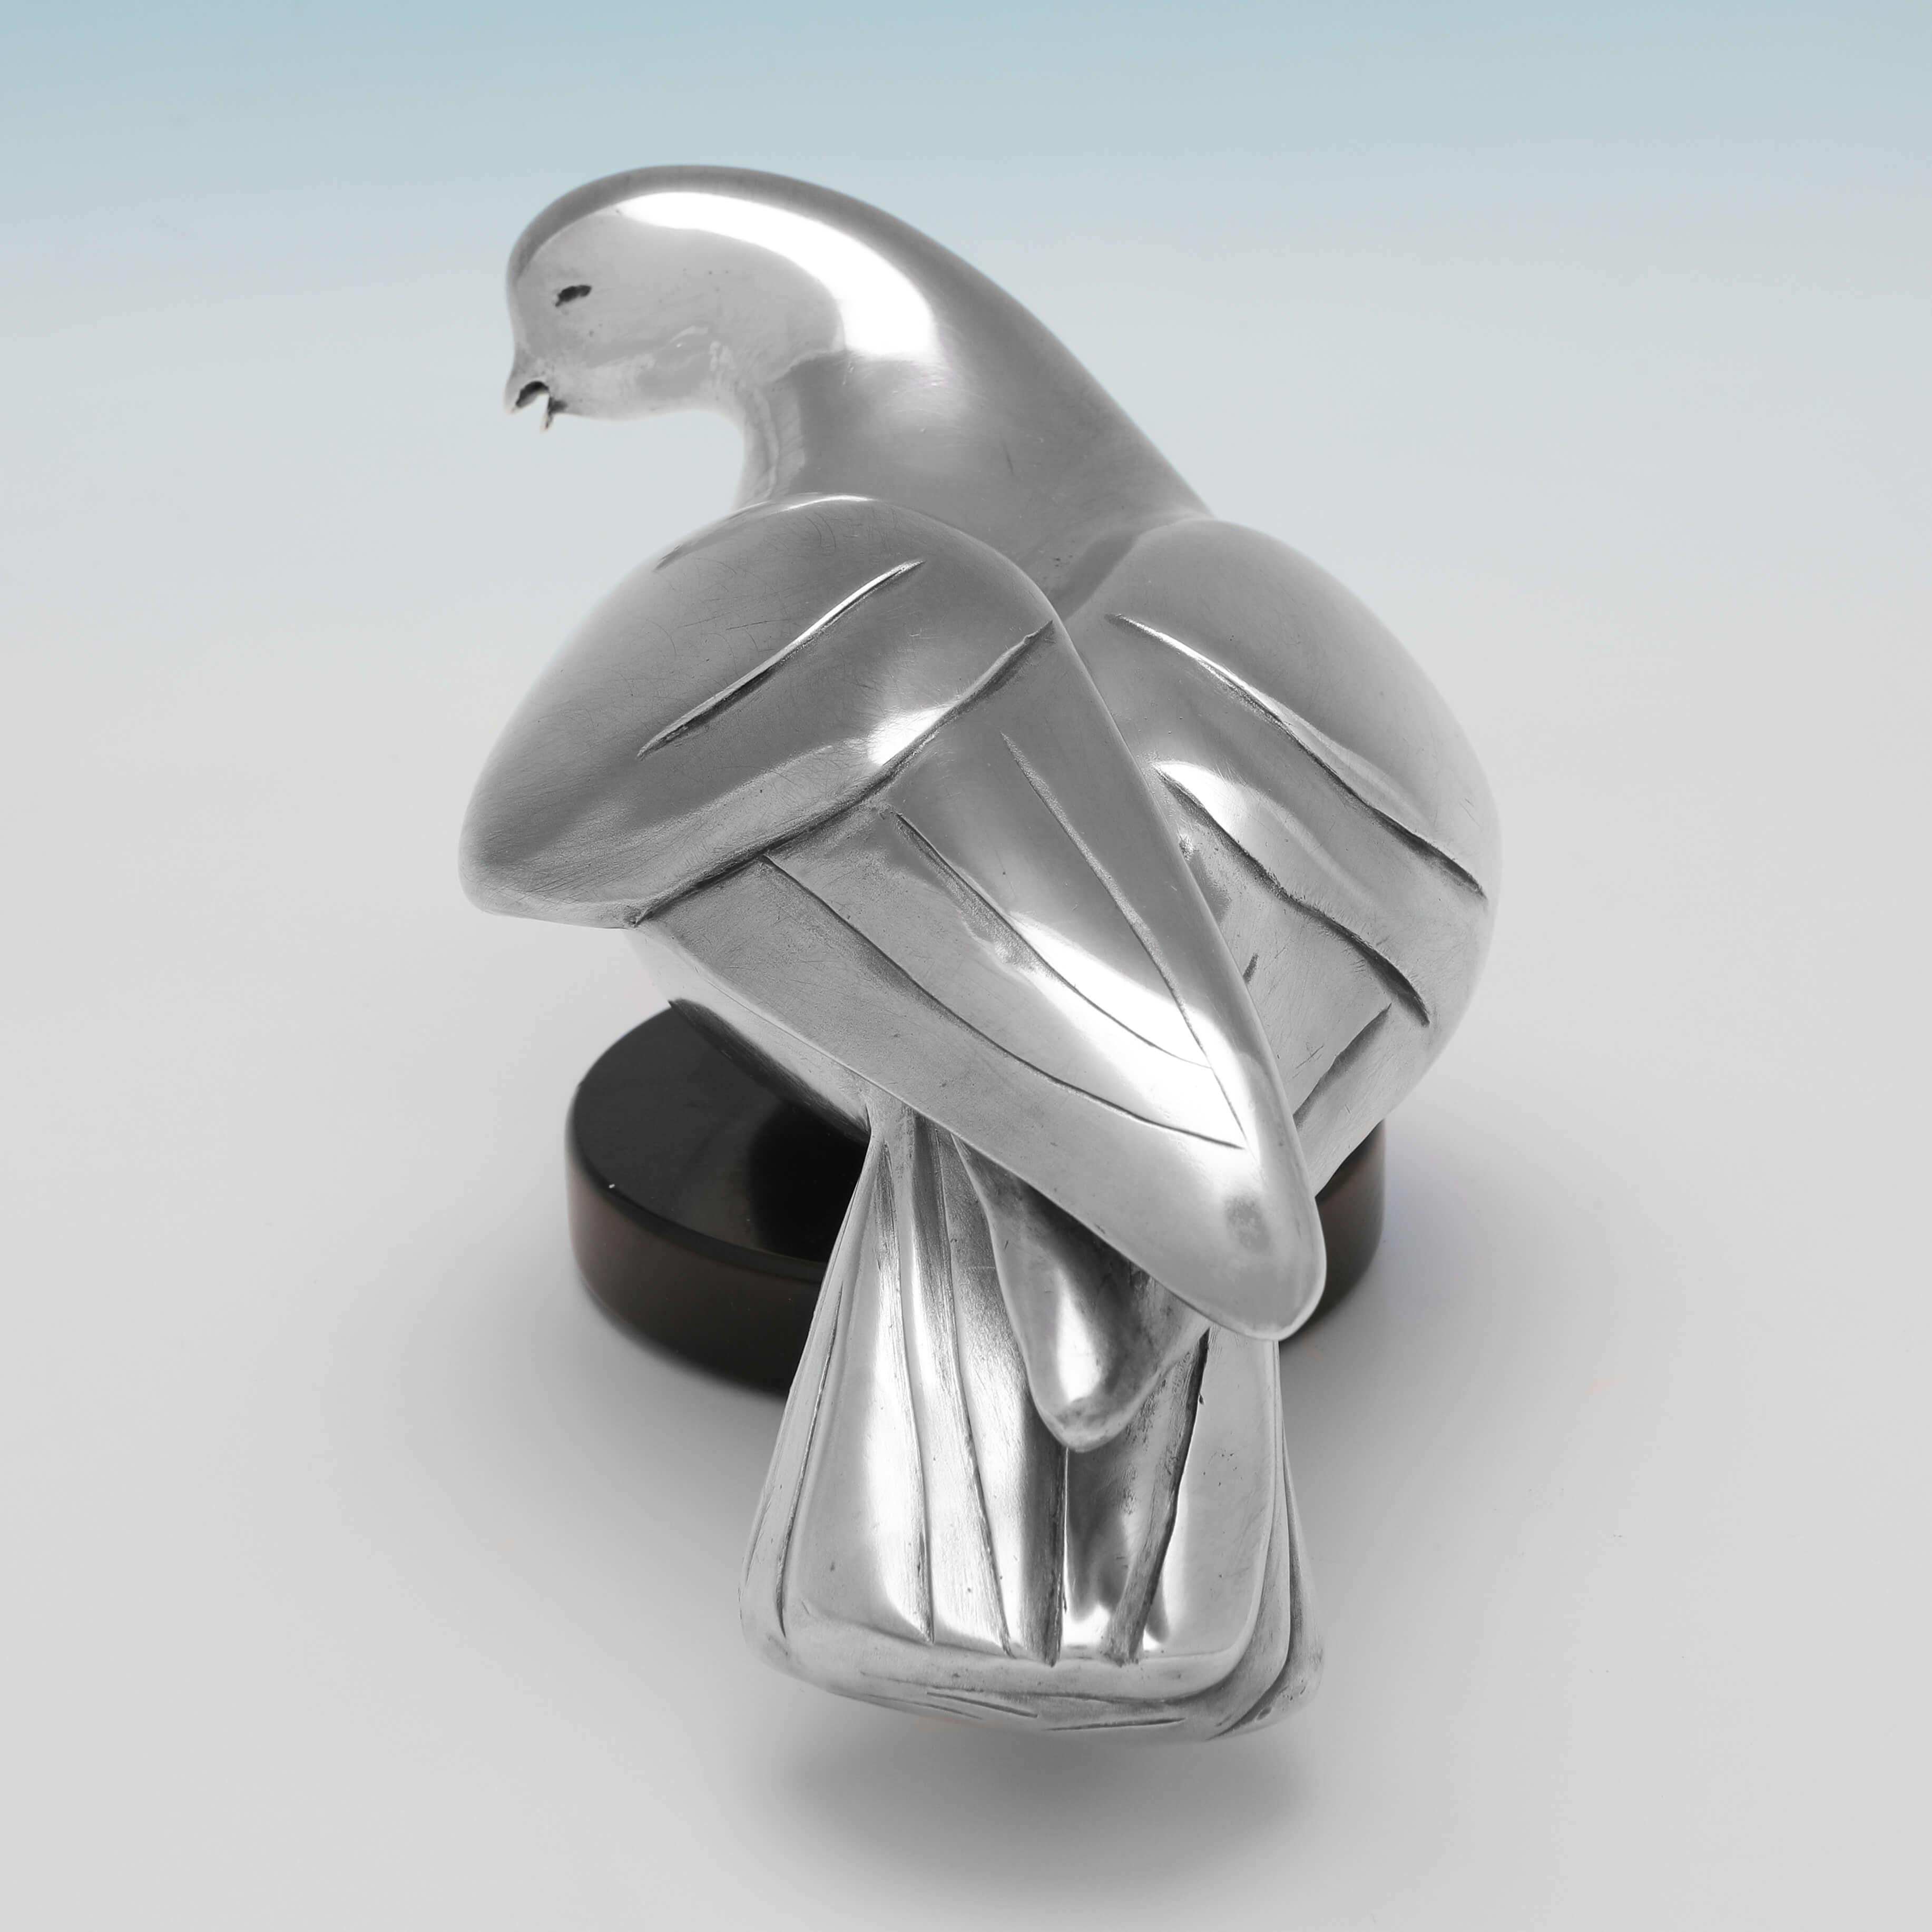 Organic Modern Mina Sunar, Signed Limited Edition of 25 Dove Sculpture in Silver, London 1999 For Sale